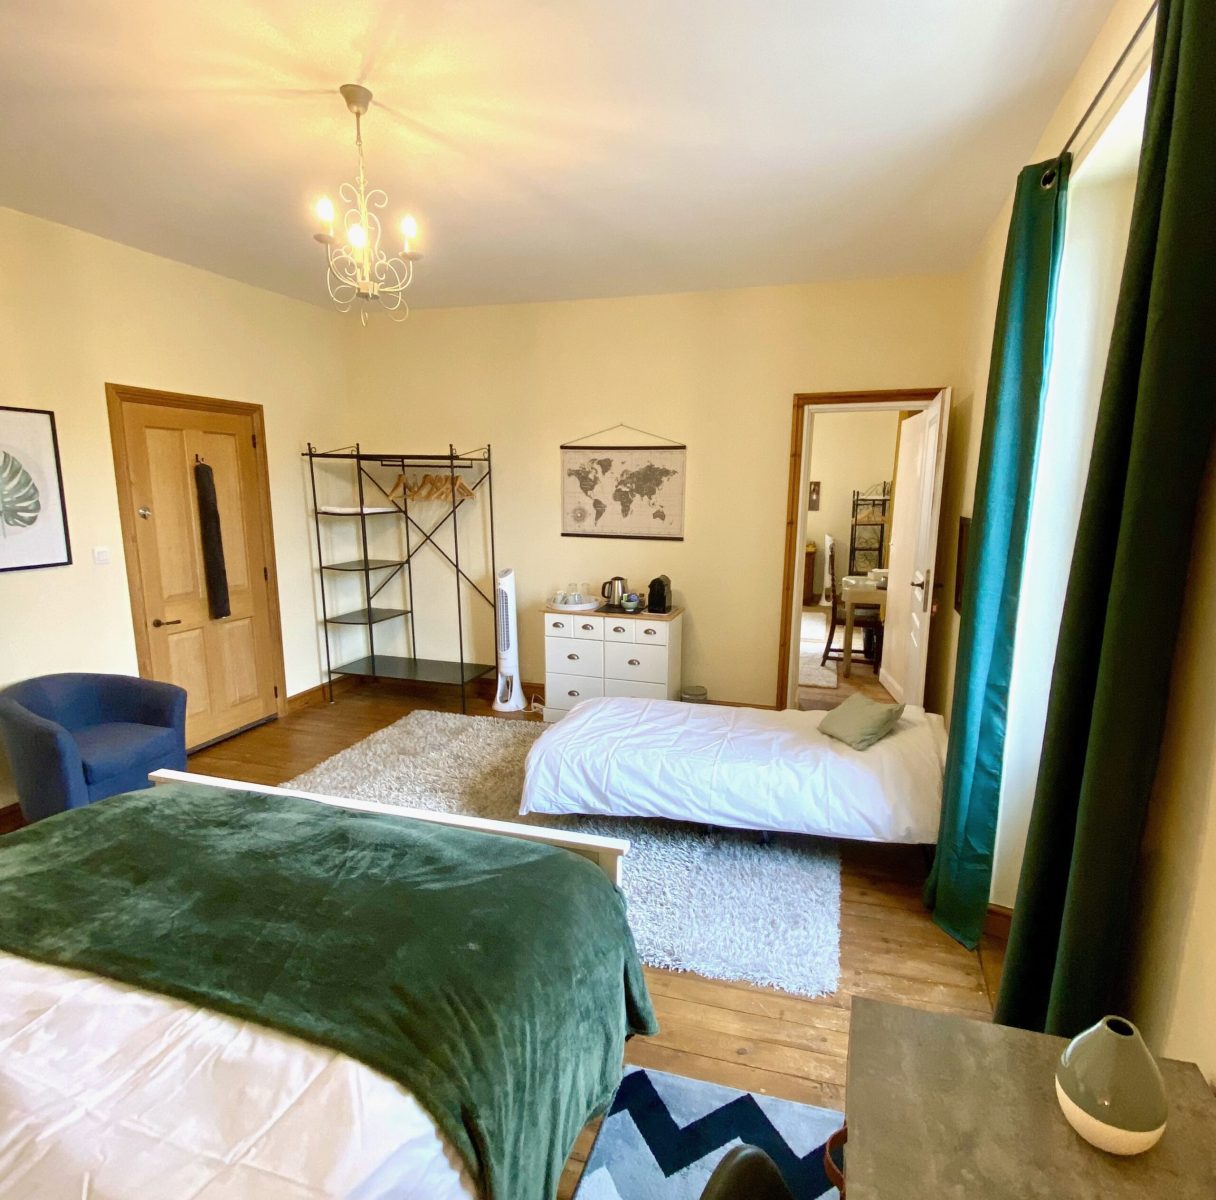 Open interconnecting rooms La Chambre Verte and La Chambre Jaune with an extra bed for a child